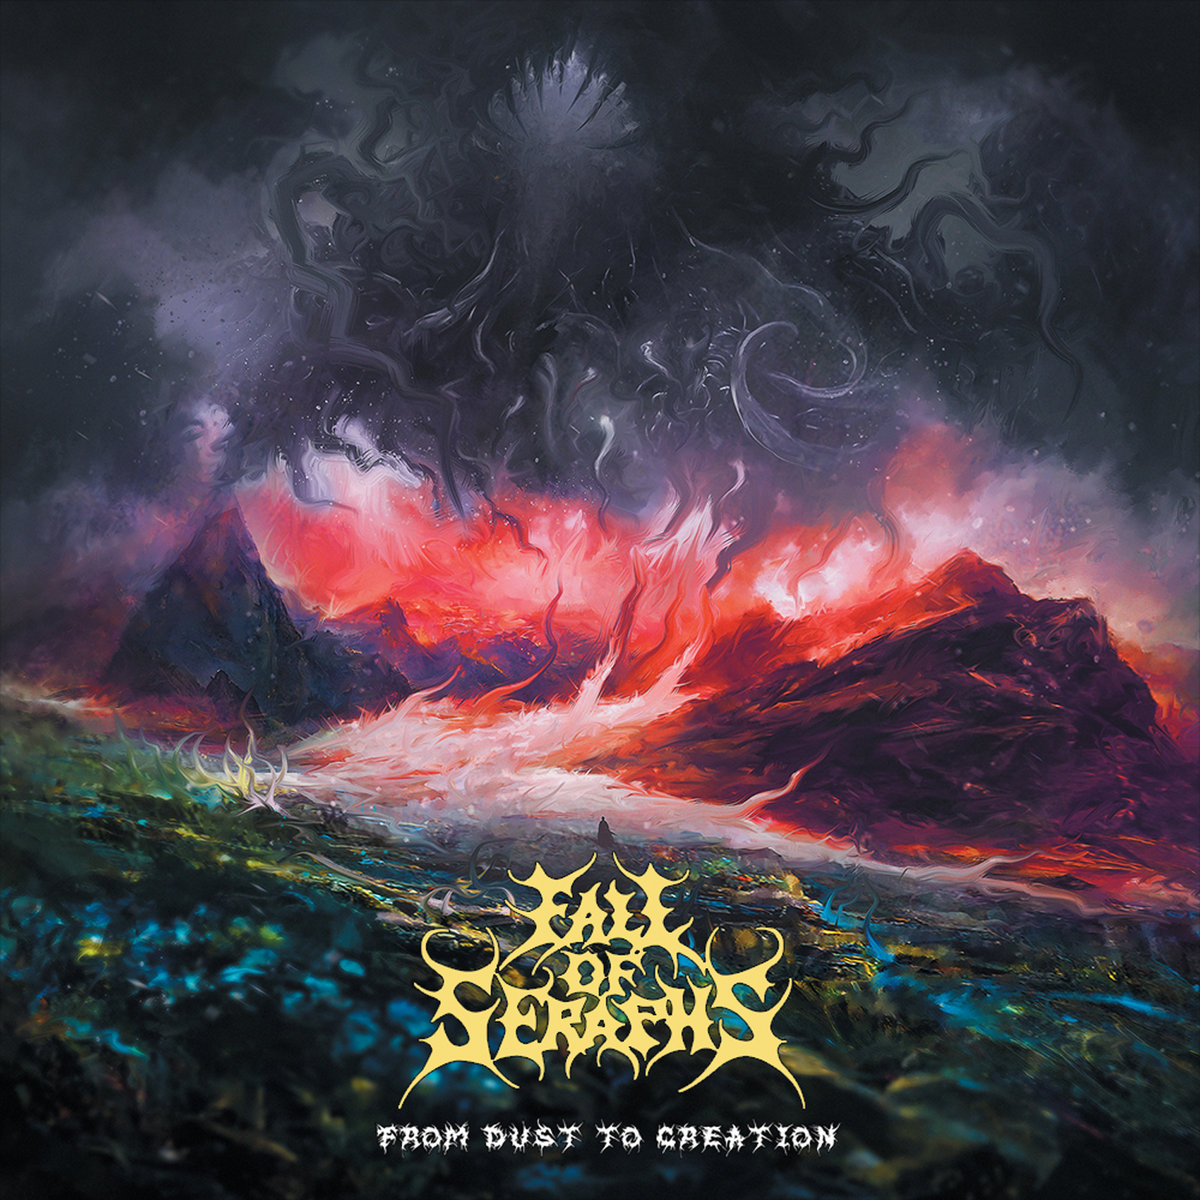 Fall Of Seraphs - "From Dust To Creation" - 2022